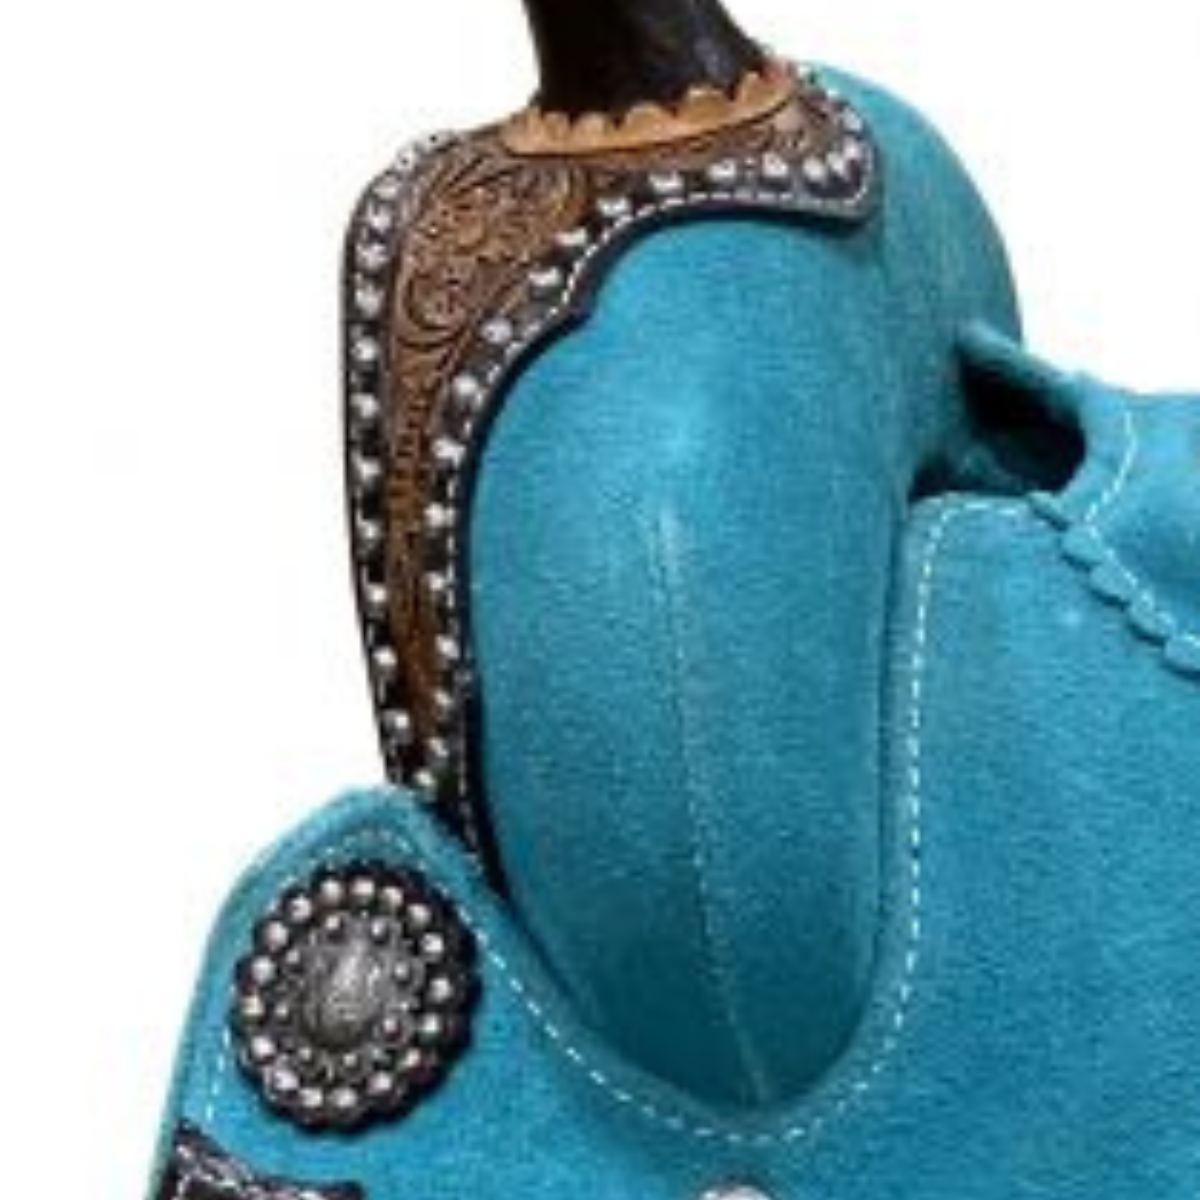 13" DOUBLE T TEAL ROUGH OUT BARREL STYLE SADDLE WITH SOUTHWEST PRINTED INLAY - Double T Saddles